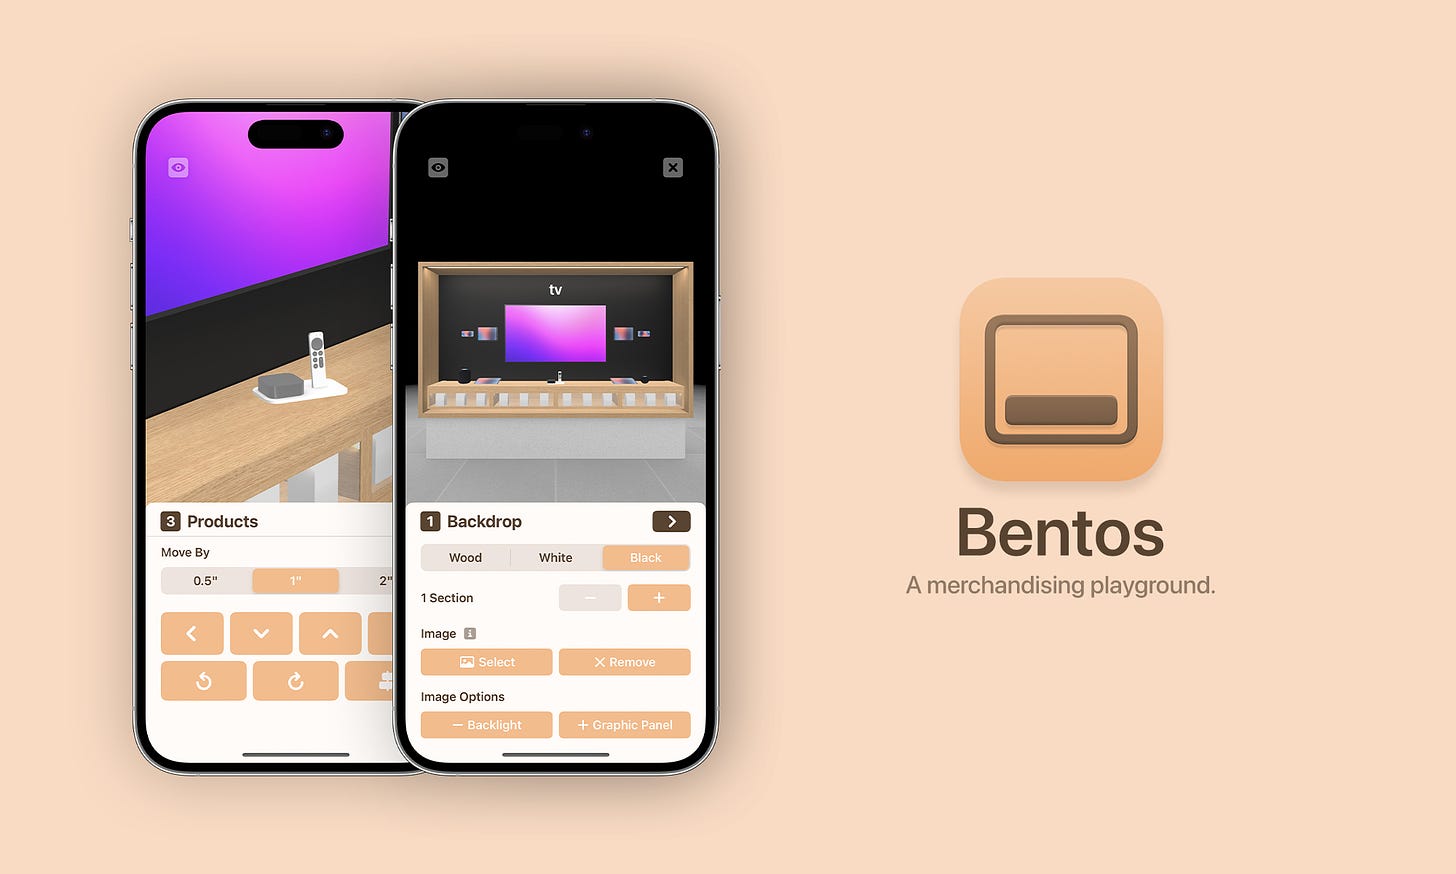 Two iPhones running Bentos demonstrate the interface and bay builder tools. The Bentos app icon is on the right side of the image.